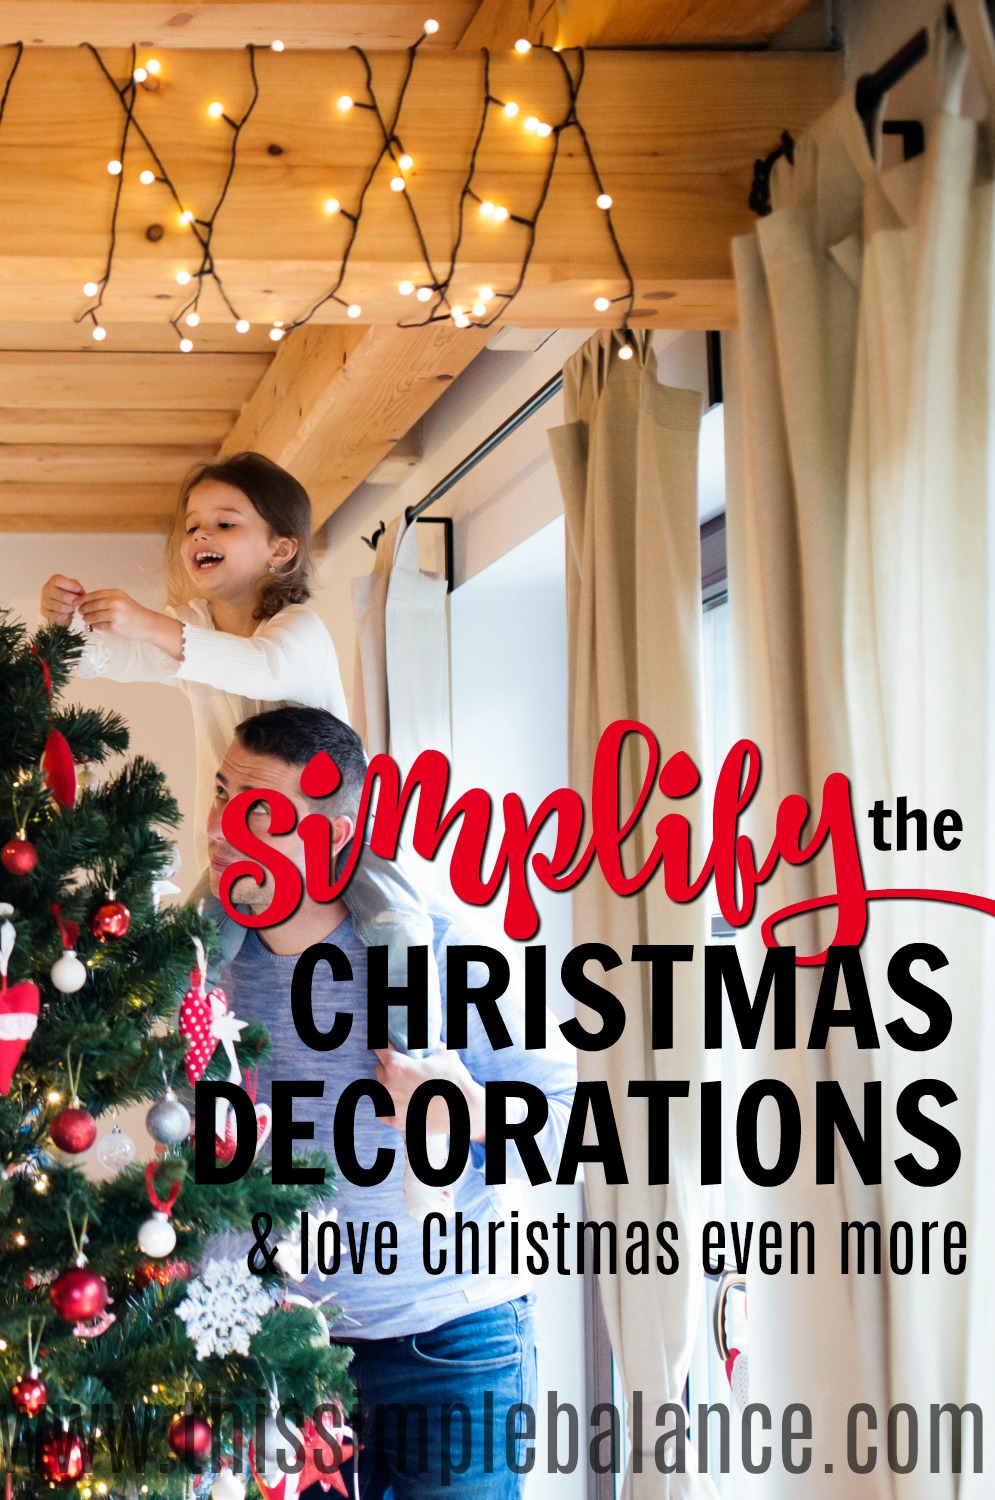 young girl putting ornament on tree, beam with white Christmas lights, with text overlay, "simplify the christmas decorations, love christmas even more"